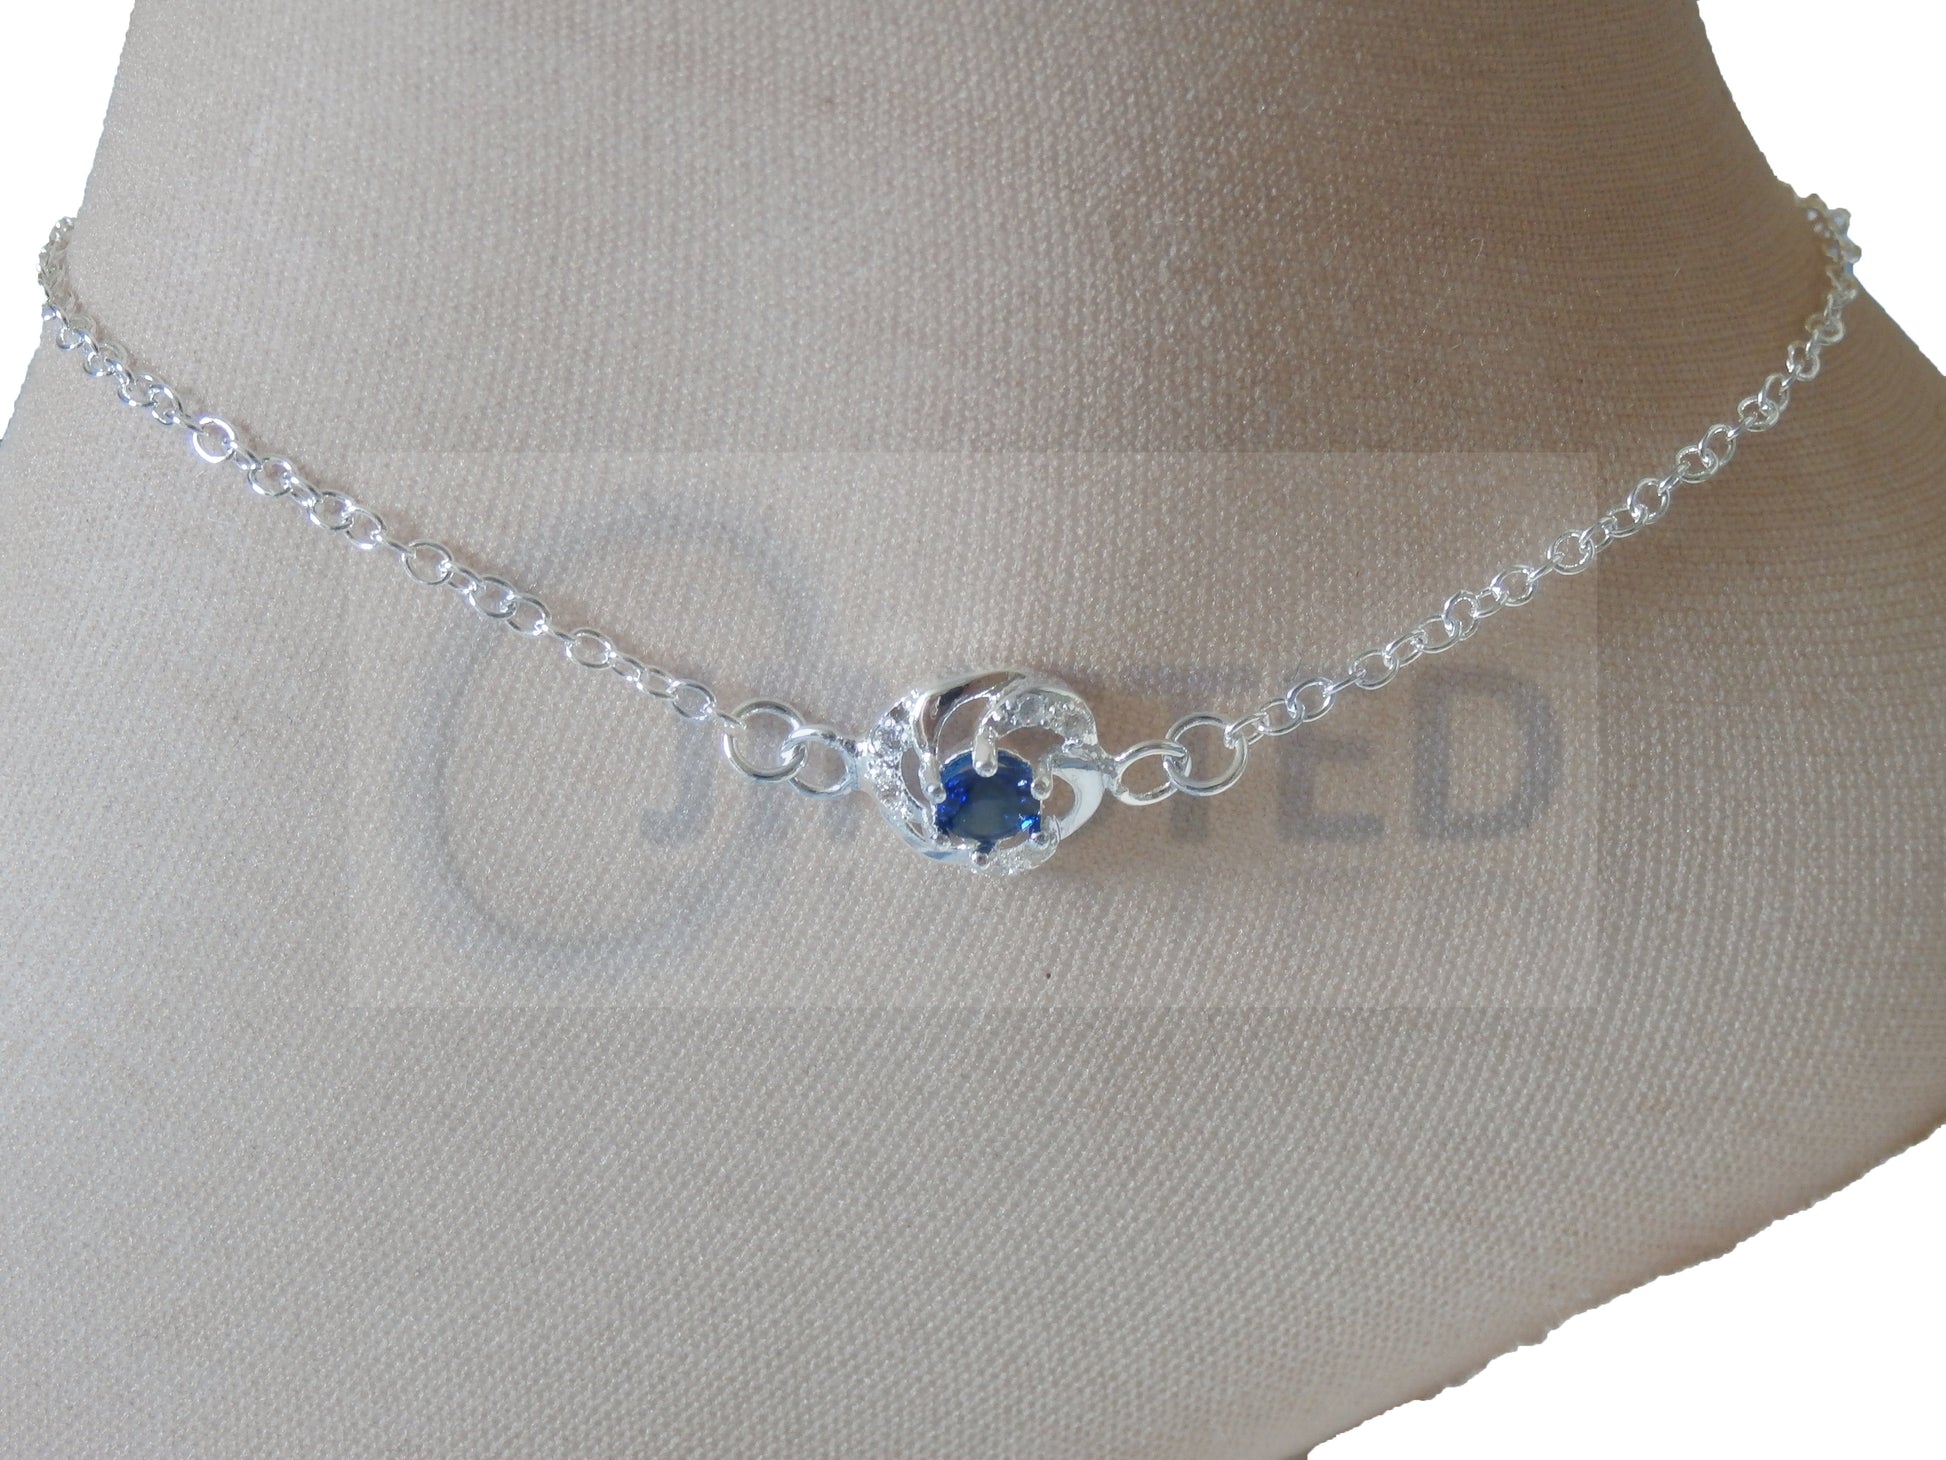 Ladies Jewellery, Silver Anklet with Blue Jewel Design, Jinsted